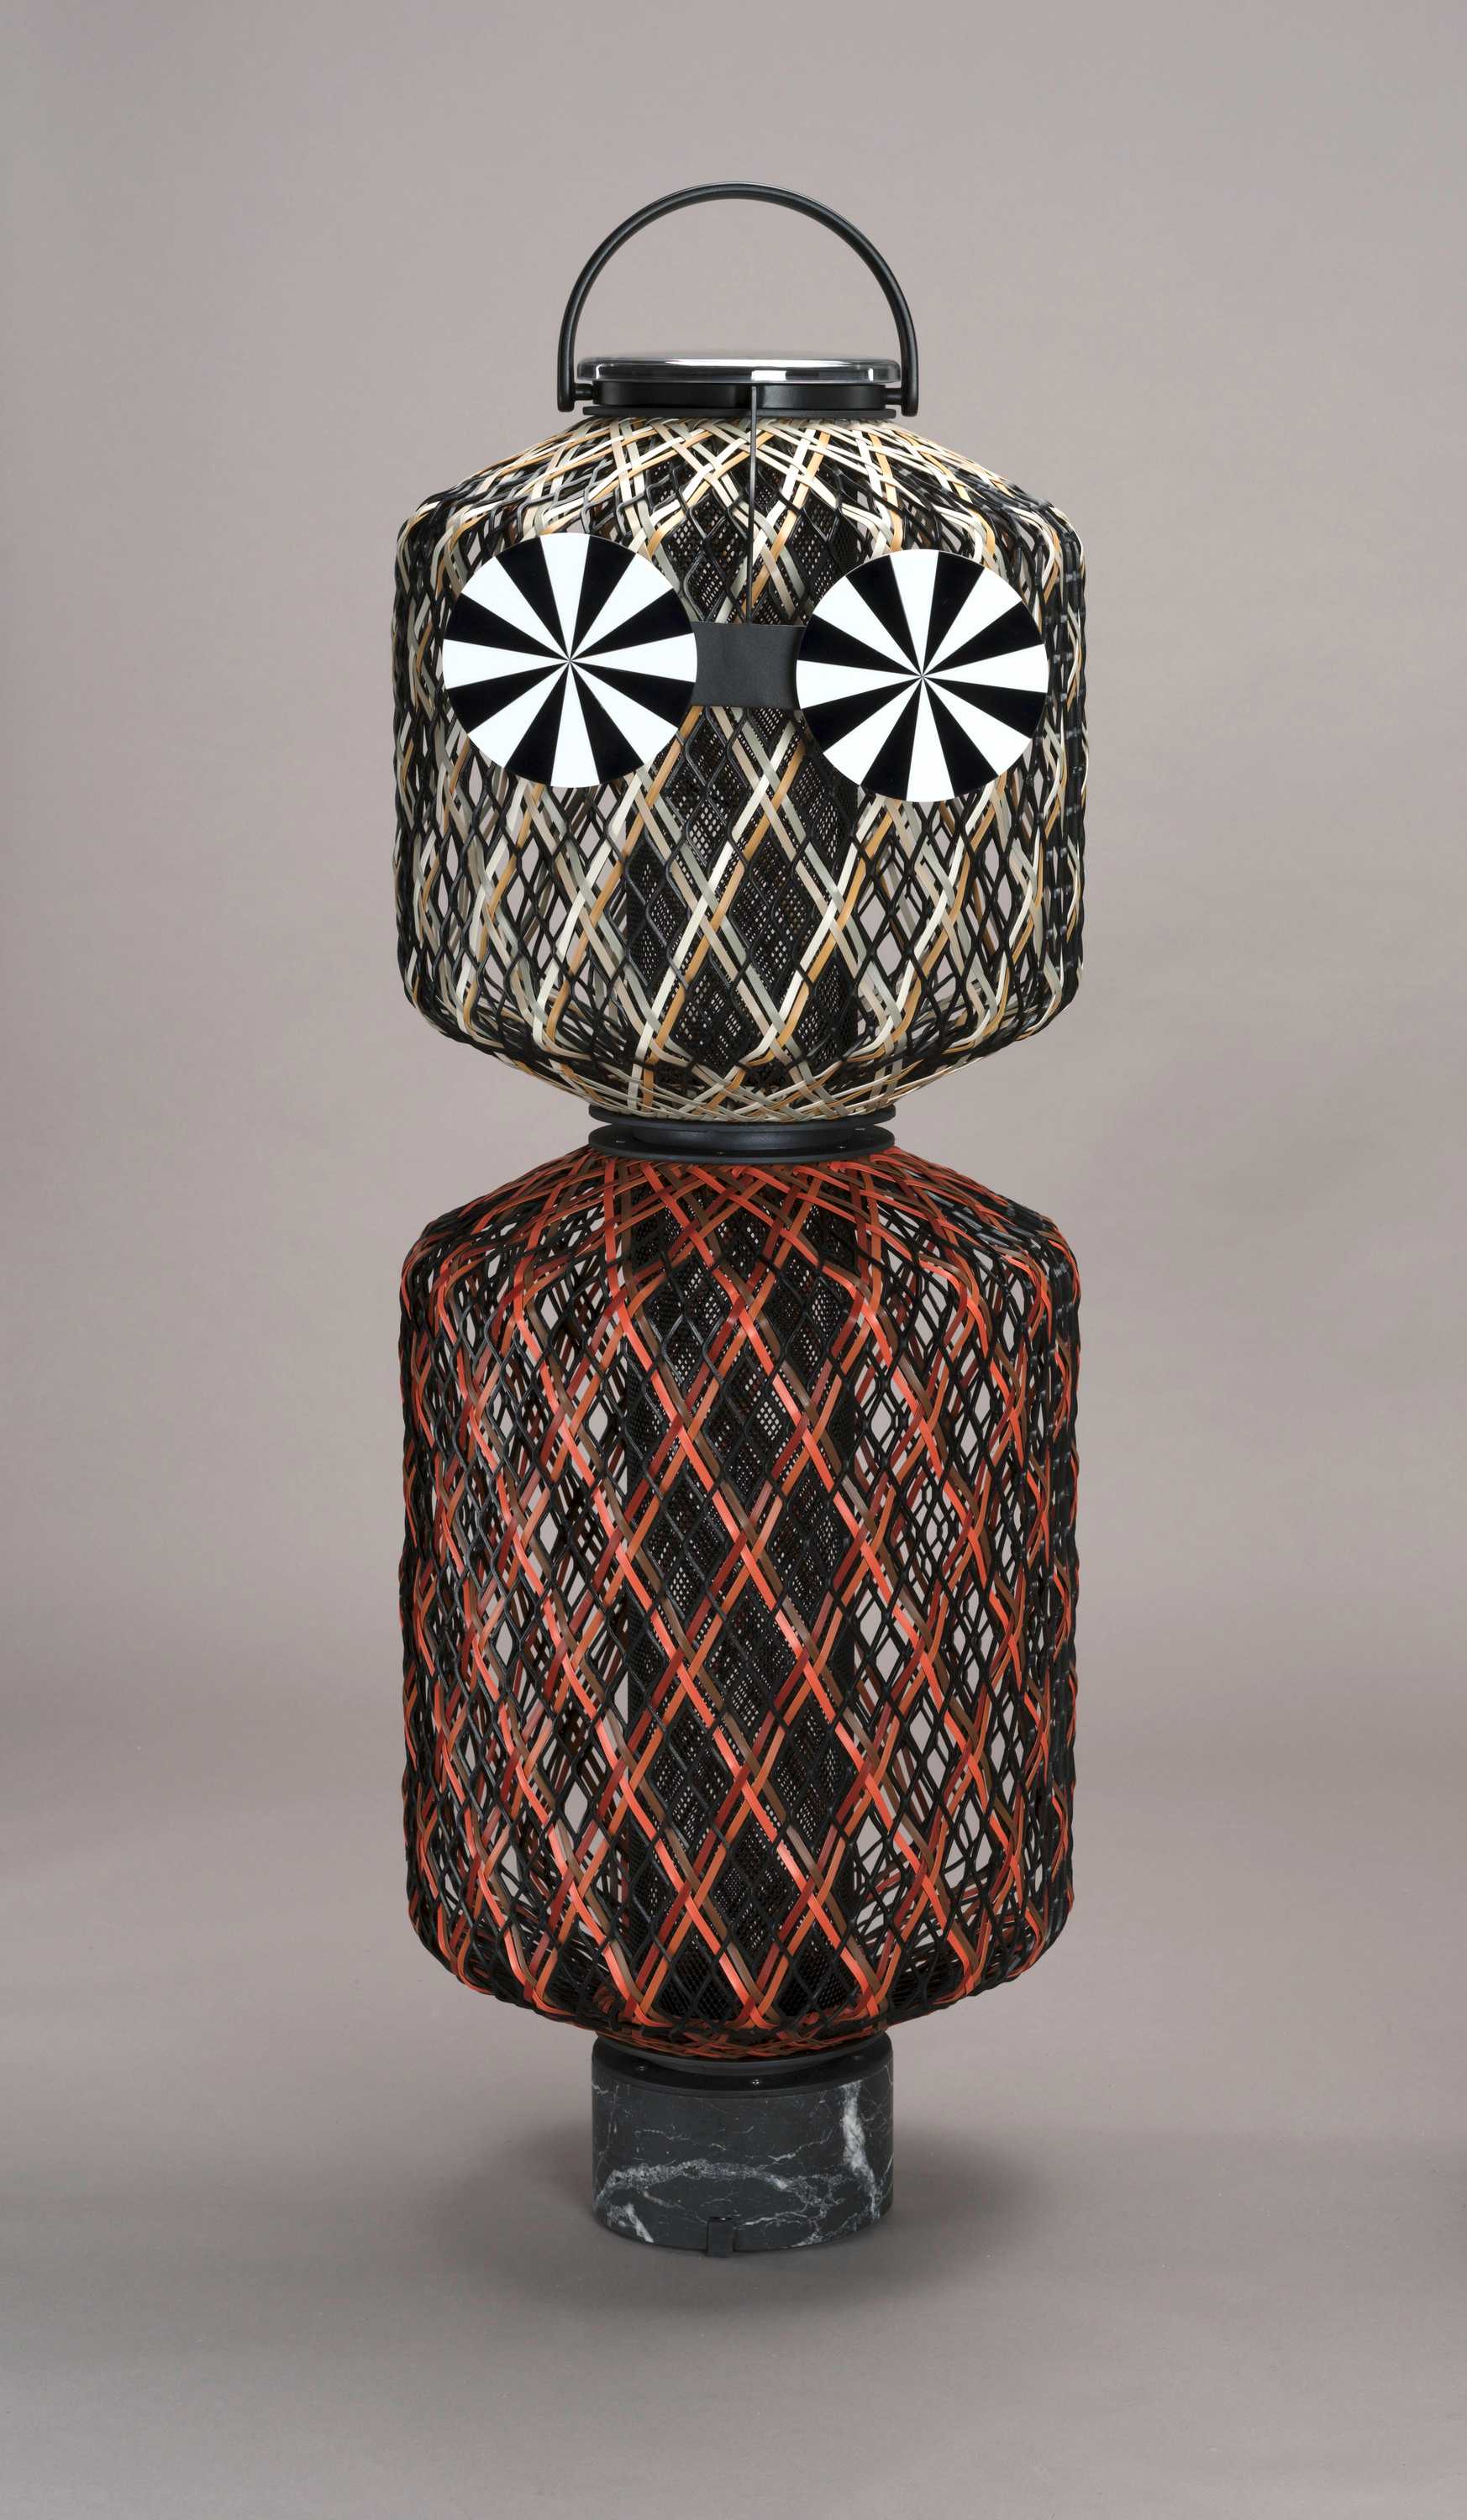 Two stacked hand-woven lantern shades, with the bottom lantern larger than the top. The frame of each lantern is made from black coated aluminum. The top lantern is in the color shade ‘Terra’ with the interwoven fibers in light brown, light grey, or beige. The bottom lantern is in the color shade ‘Rock’ with the red, orange, and brown interwoven fibers.